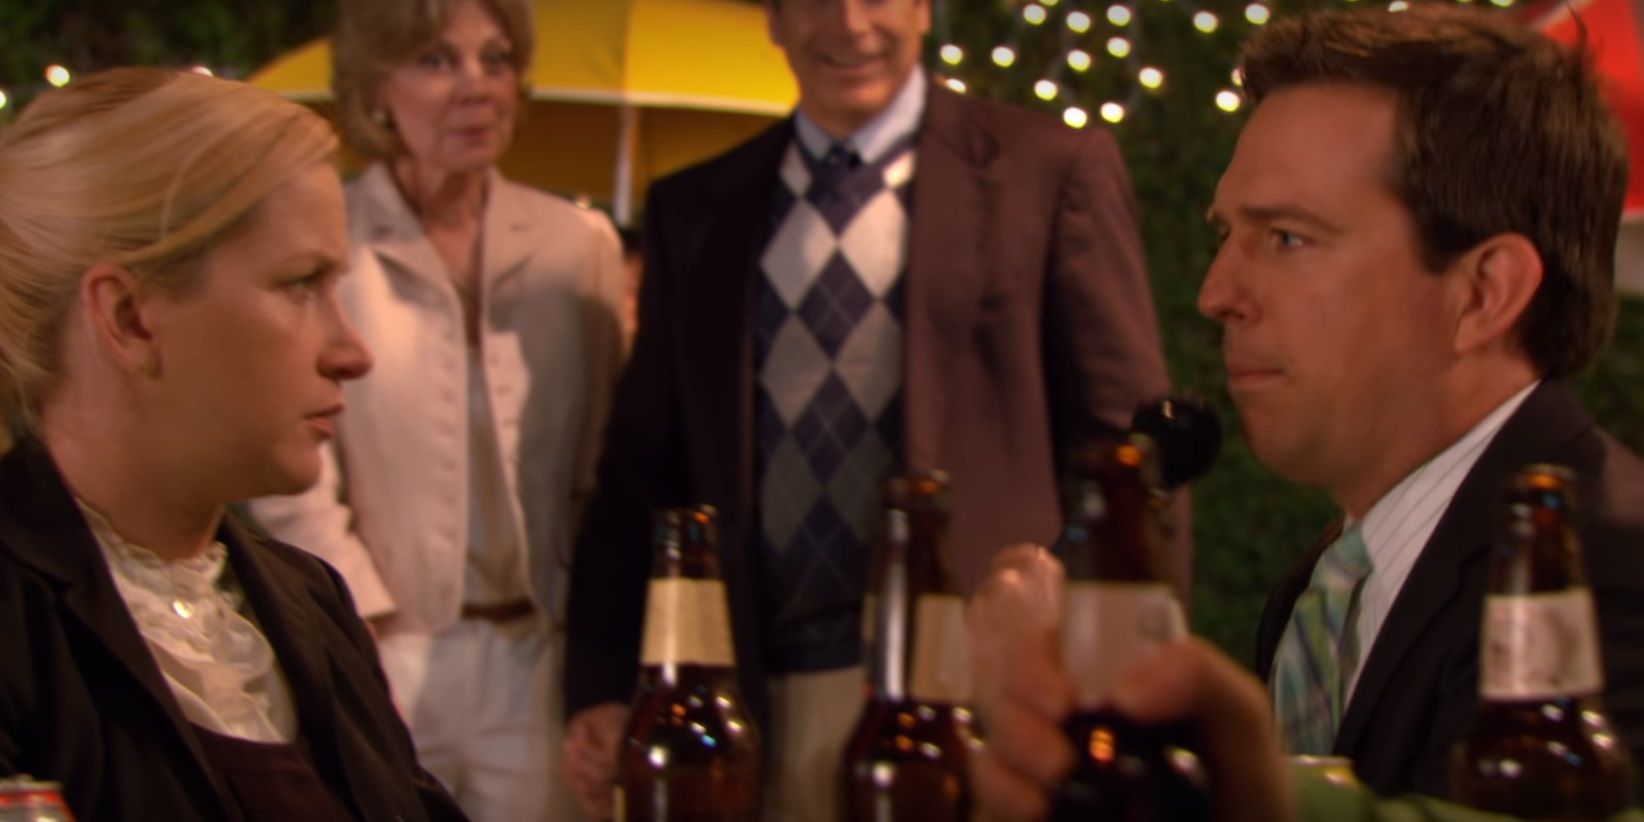 Andy proposes to Angela in The Office